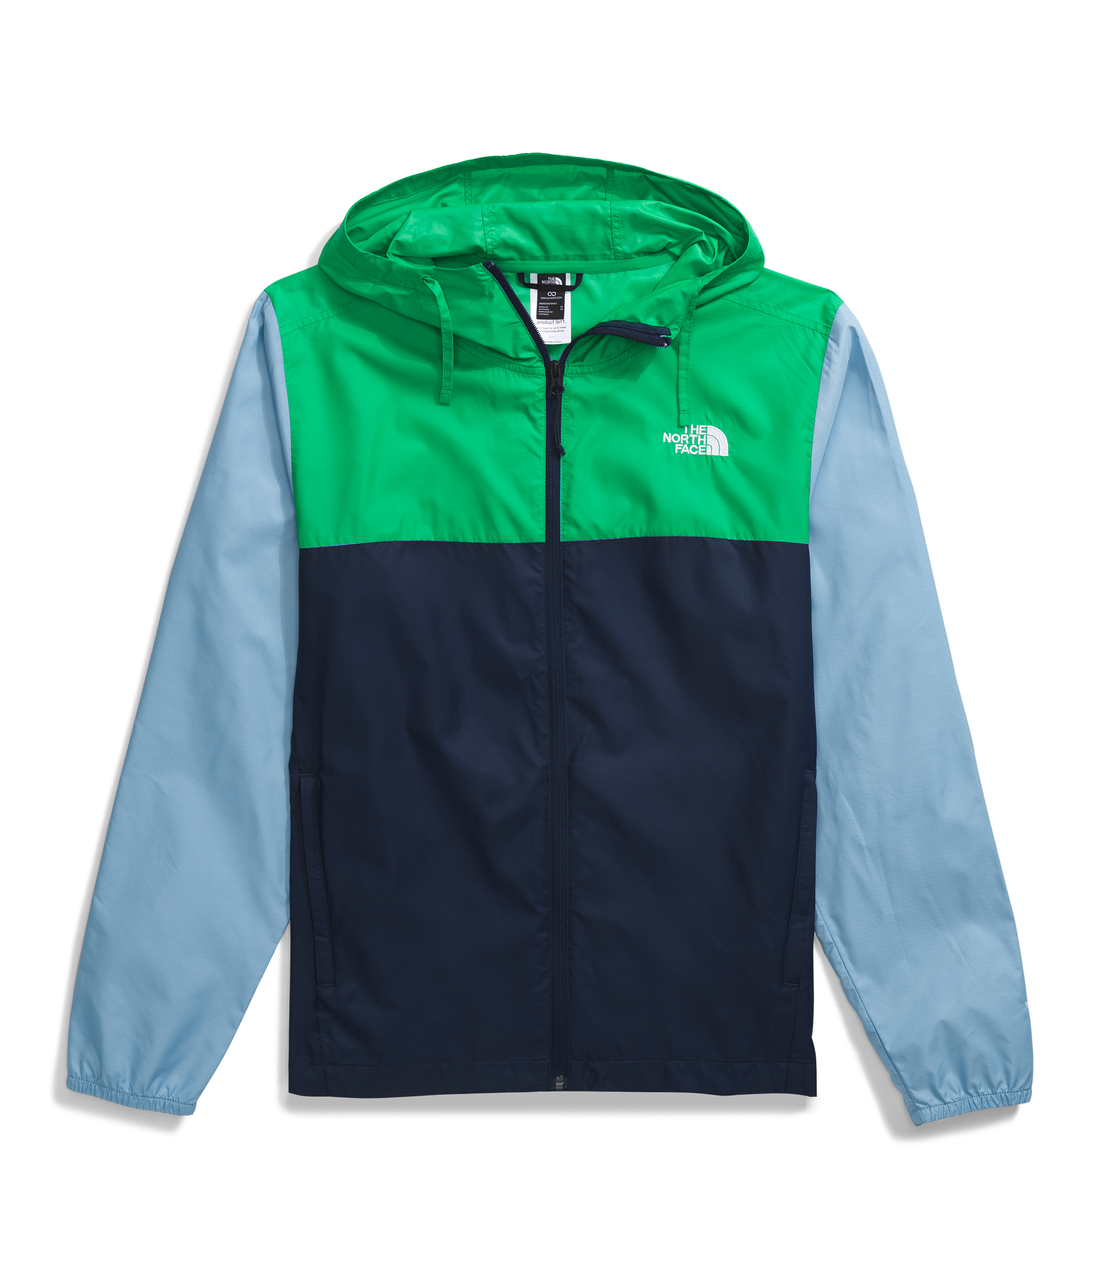 The North Face Cyclone 3 Jacket - Summit Navy/Optic Emerald/Steel 